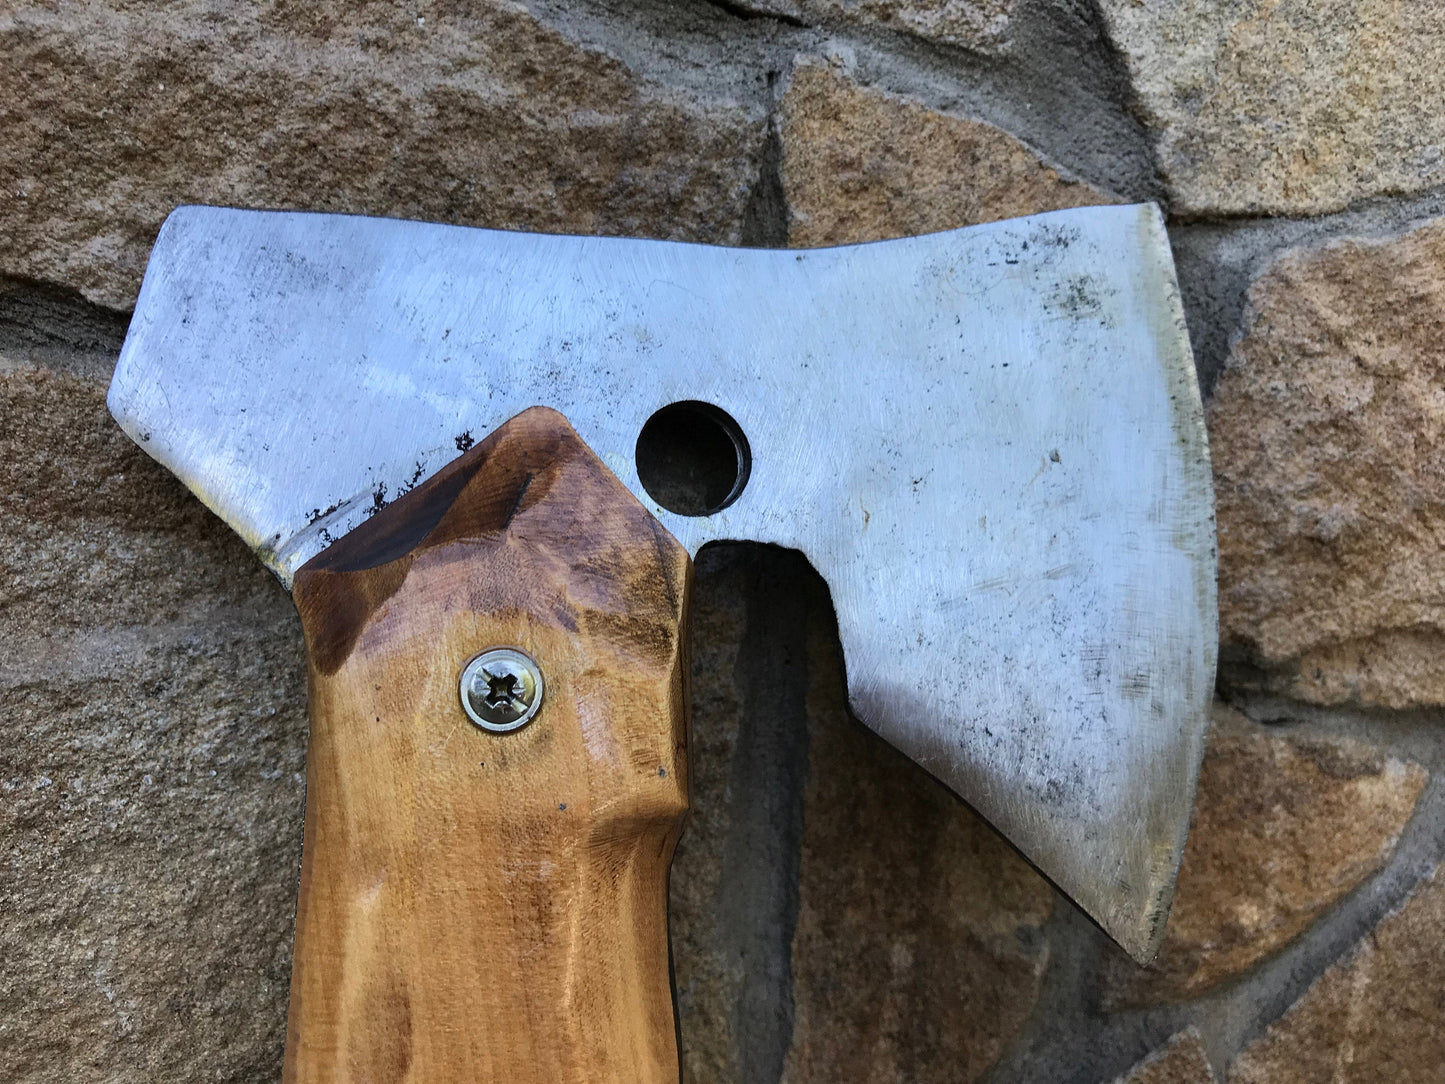 Throwing axe, viking axe, tactical axe, medieval axe, axe, mens gifts, iron gift for him, tomahawk, hiking, hunting,gifts for men,manly gift